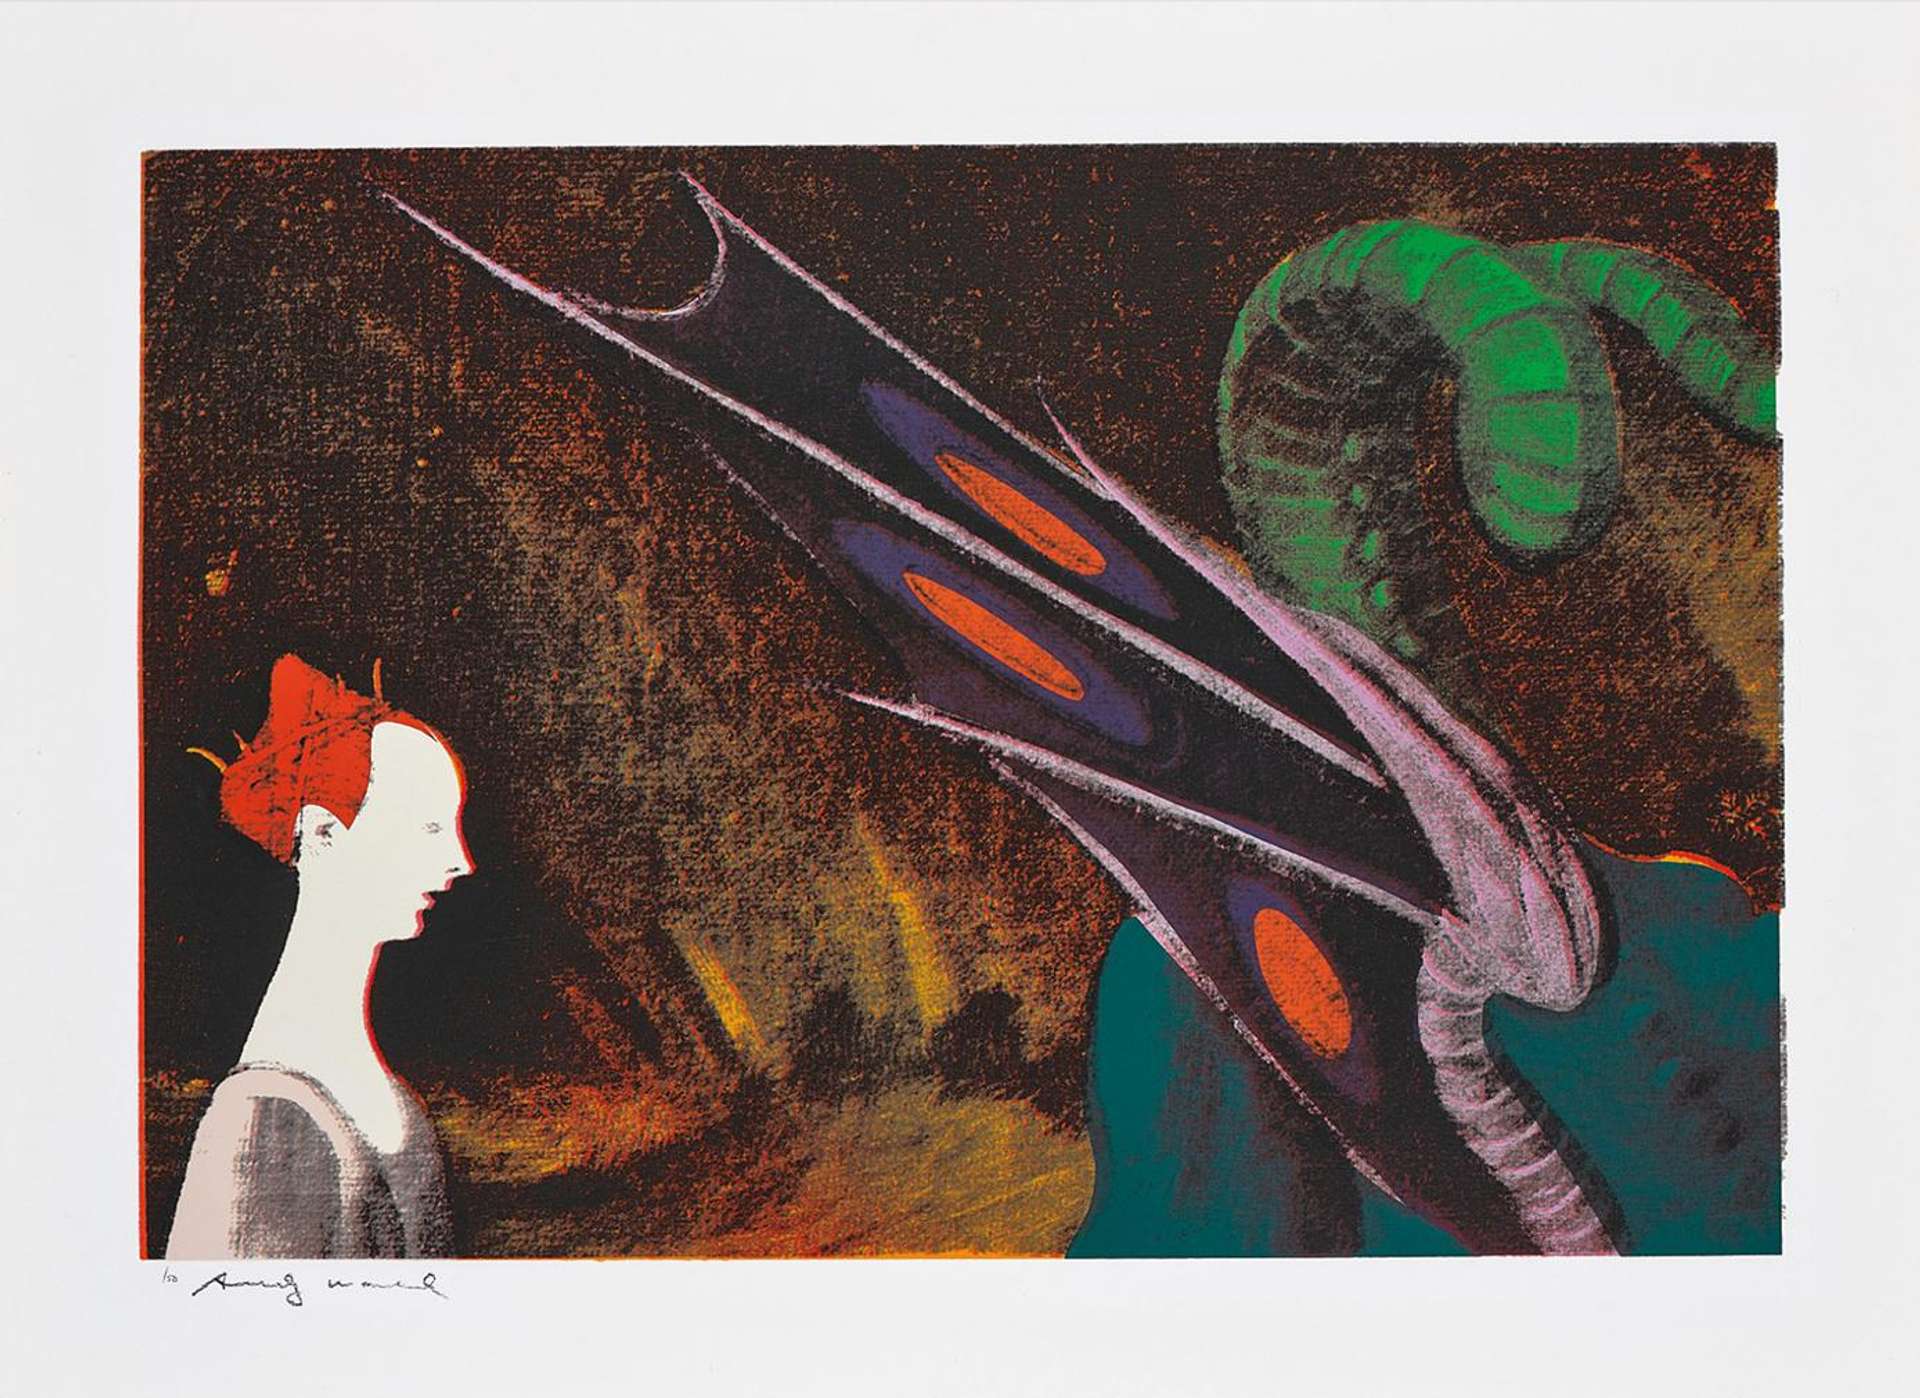 Warhol’s translation of the image by Uccello has a tightly cropped composition focusing on the dragon’s spiky, spotted wings, corkscrew tail and the princess flattened against the picture plane.